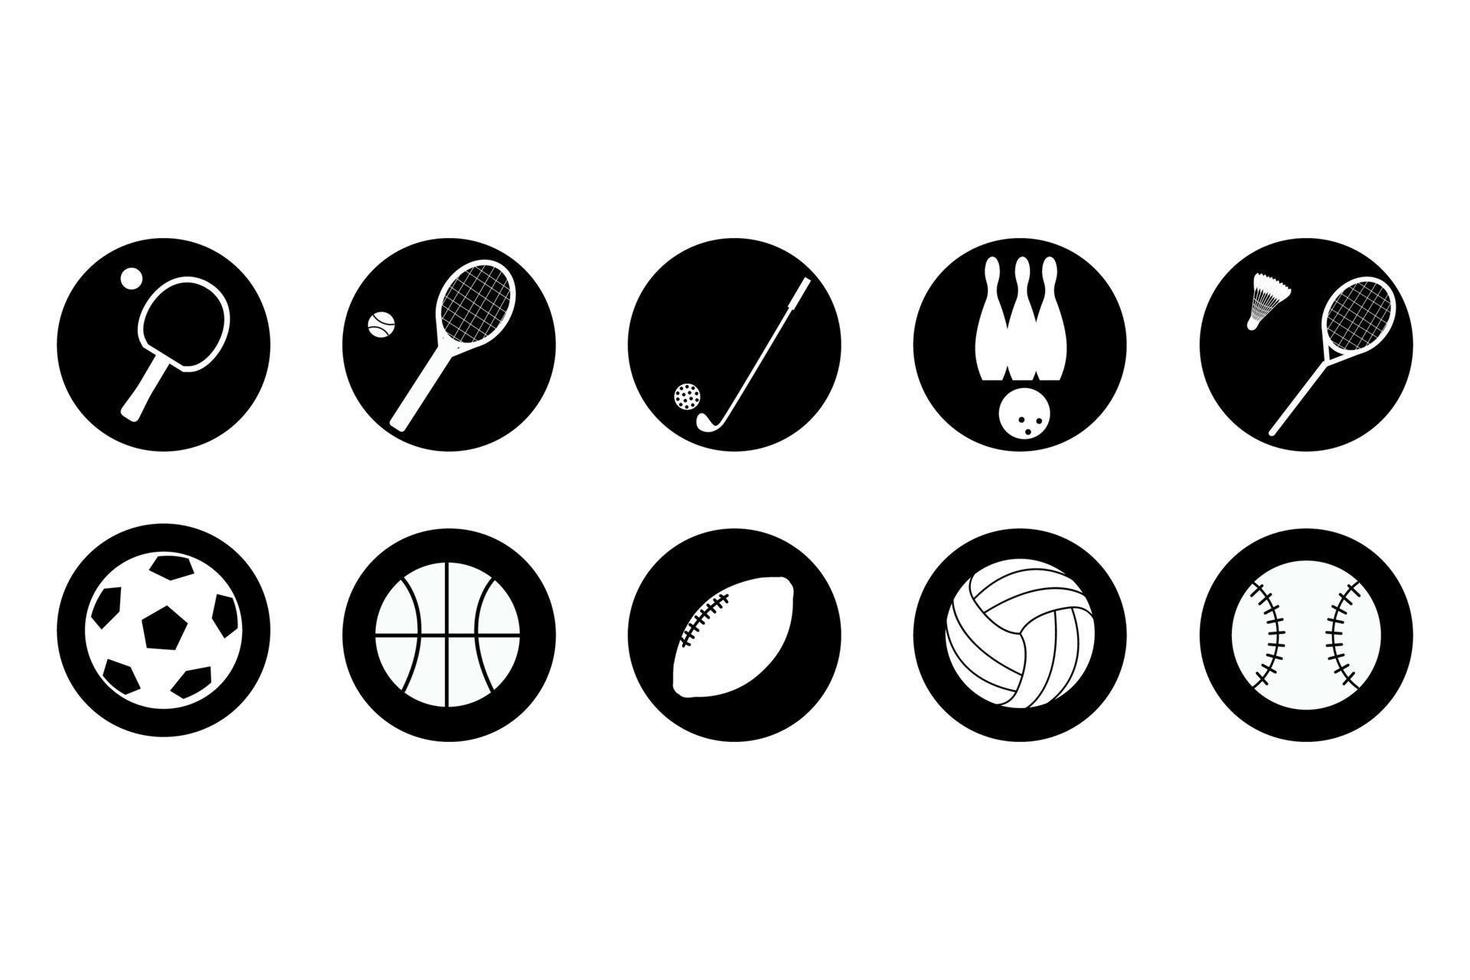 Portable equipment icons. Sports concept with balls and game items. Vector illustration